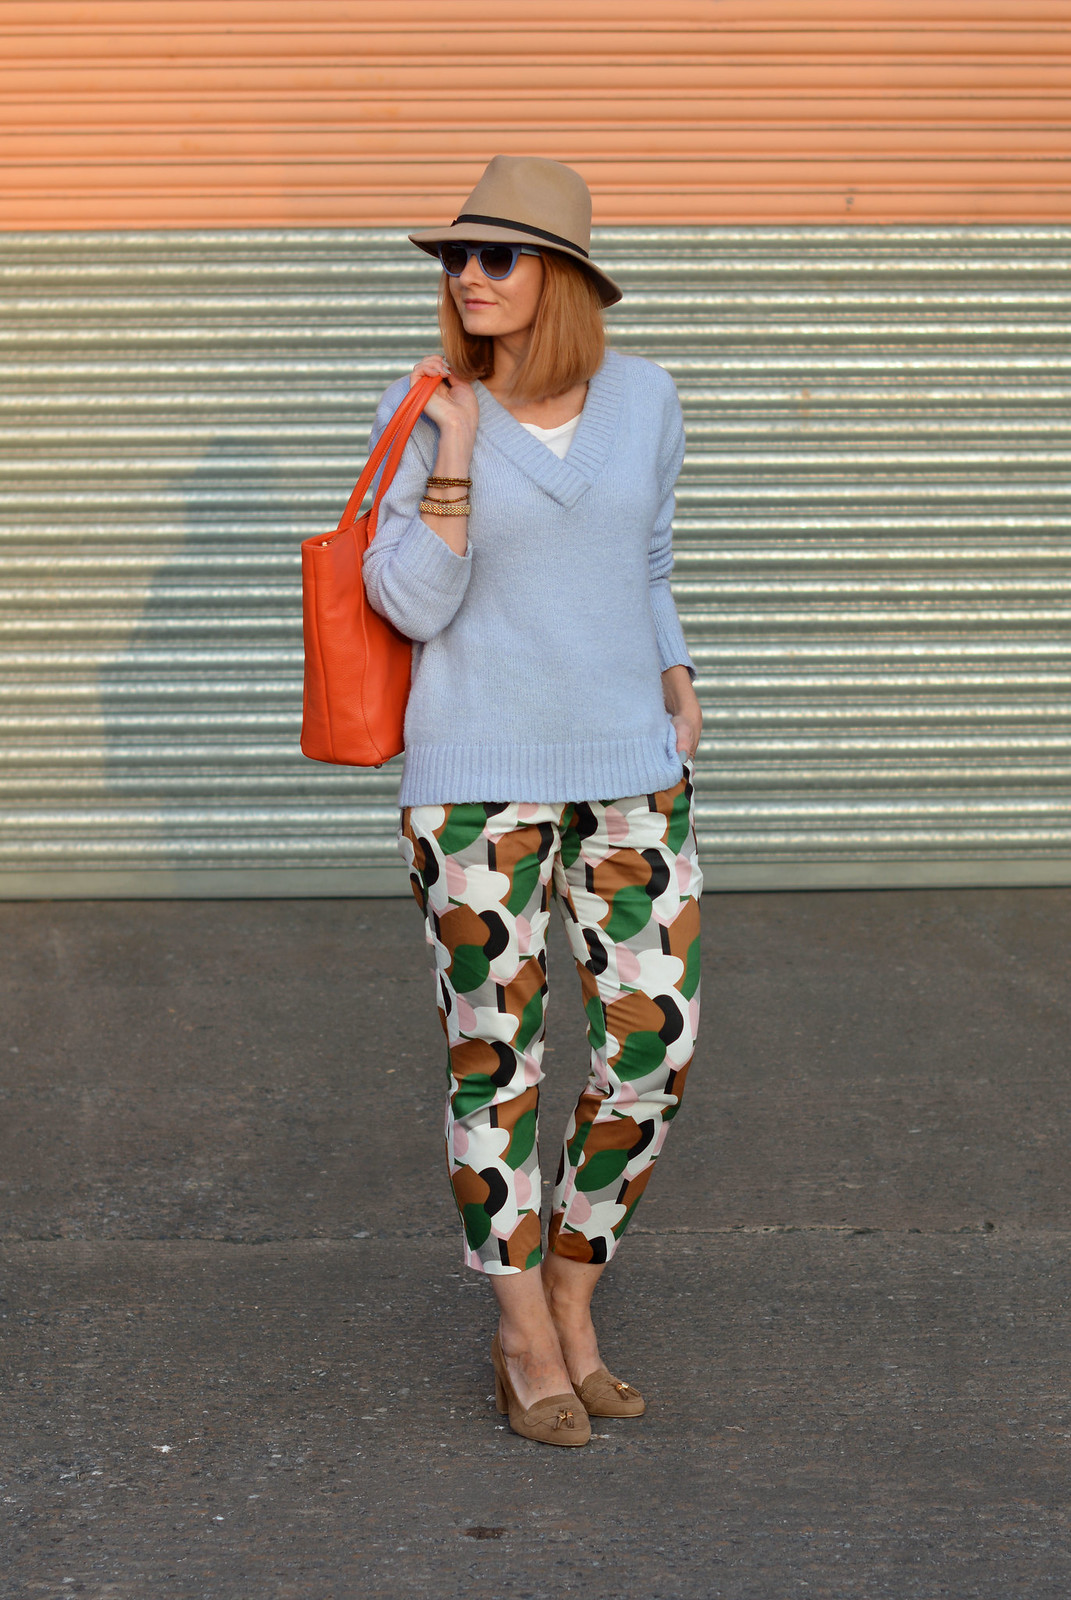 Spring style: Bold patterned pants, pale knit, orange tote, camel fedora | Not Dressed As Lamb